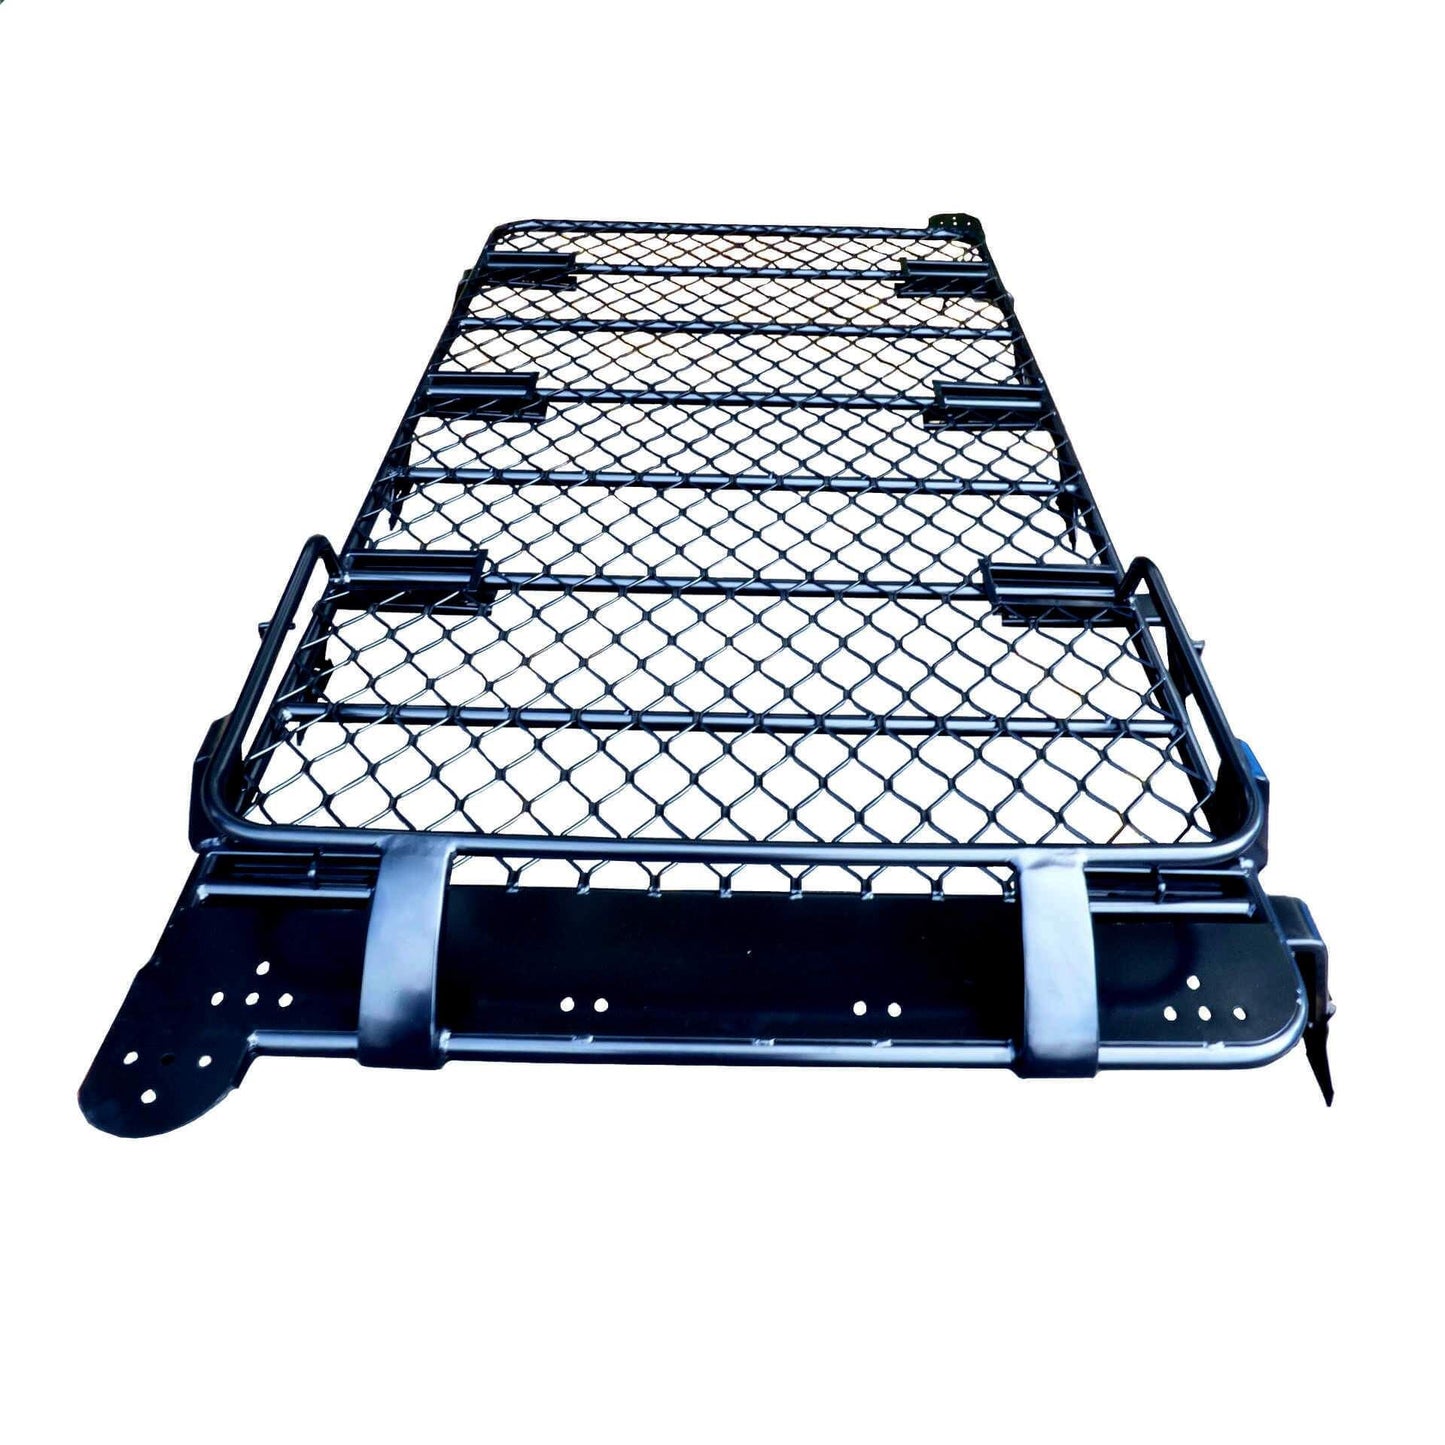 Expedition Aluminium Front Basket Roof Rack for Land Rover Discovery 3 and 4